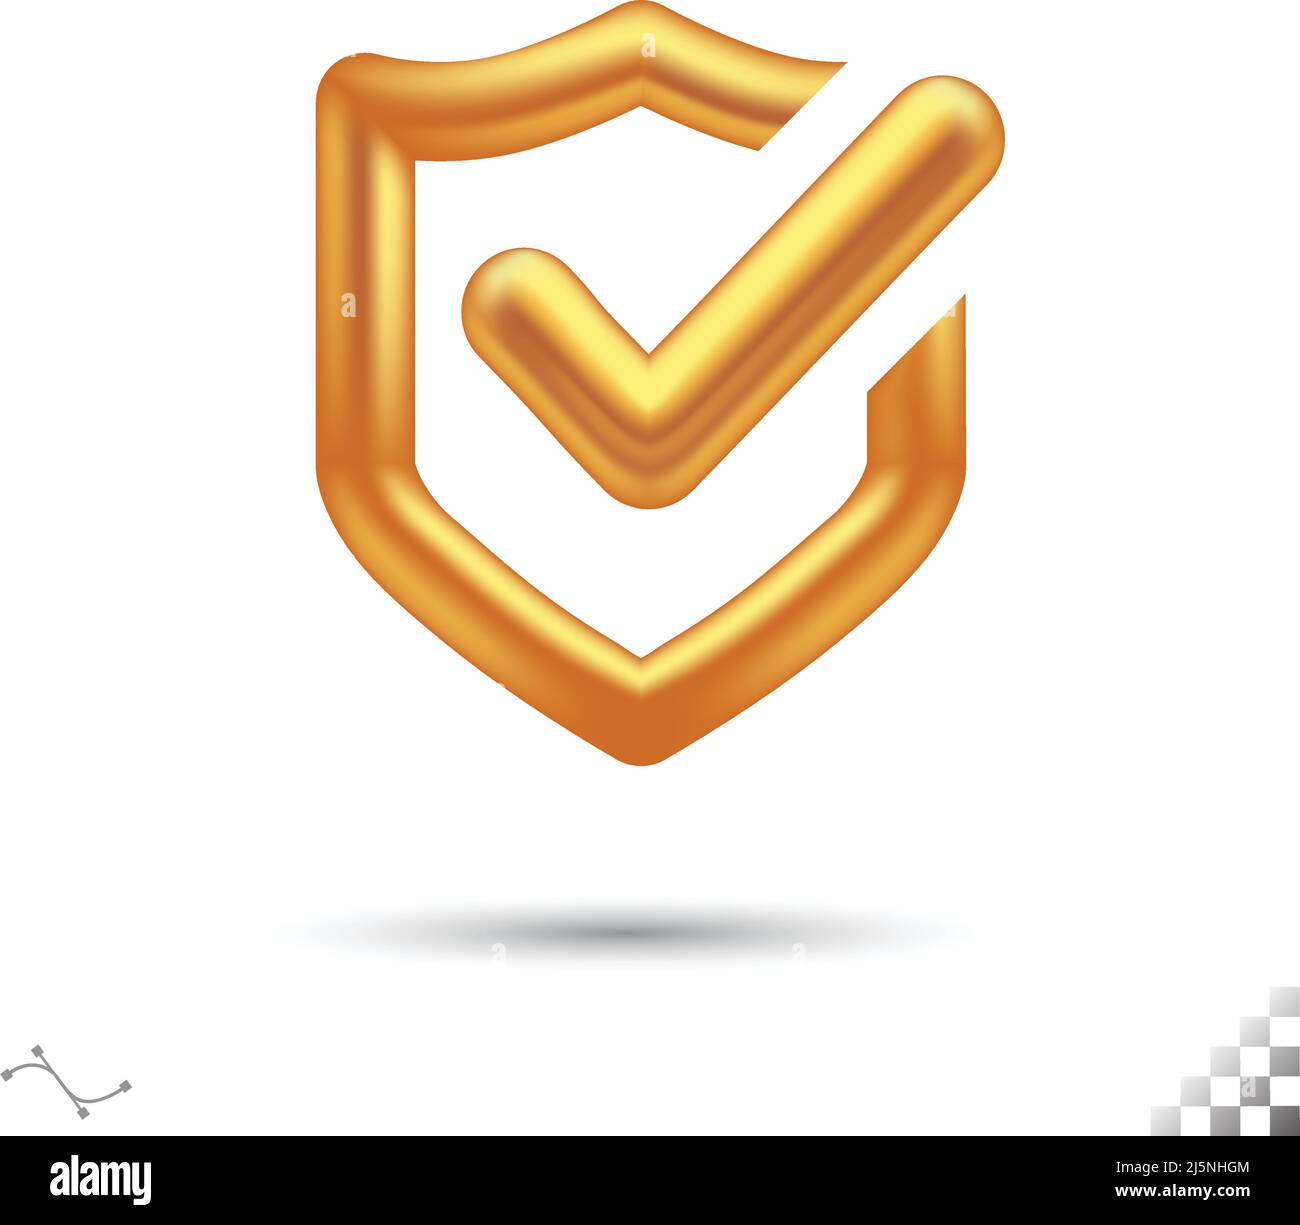 Shield Shape Logo High-Res Vector Graphic - Getty Images